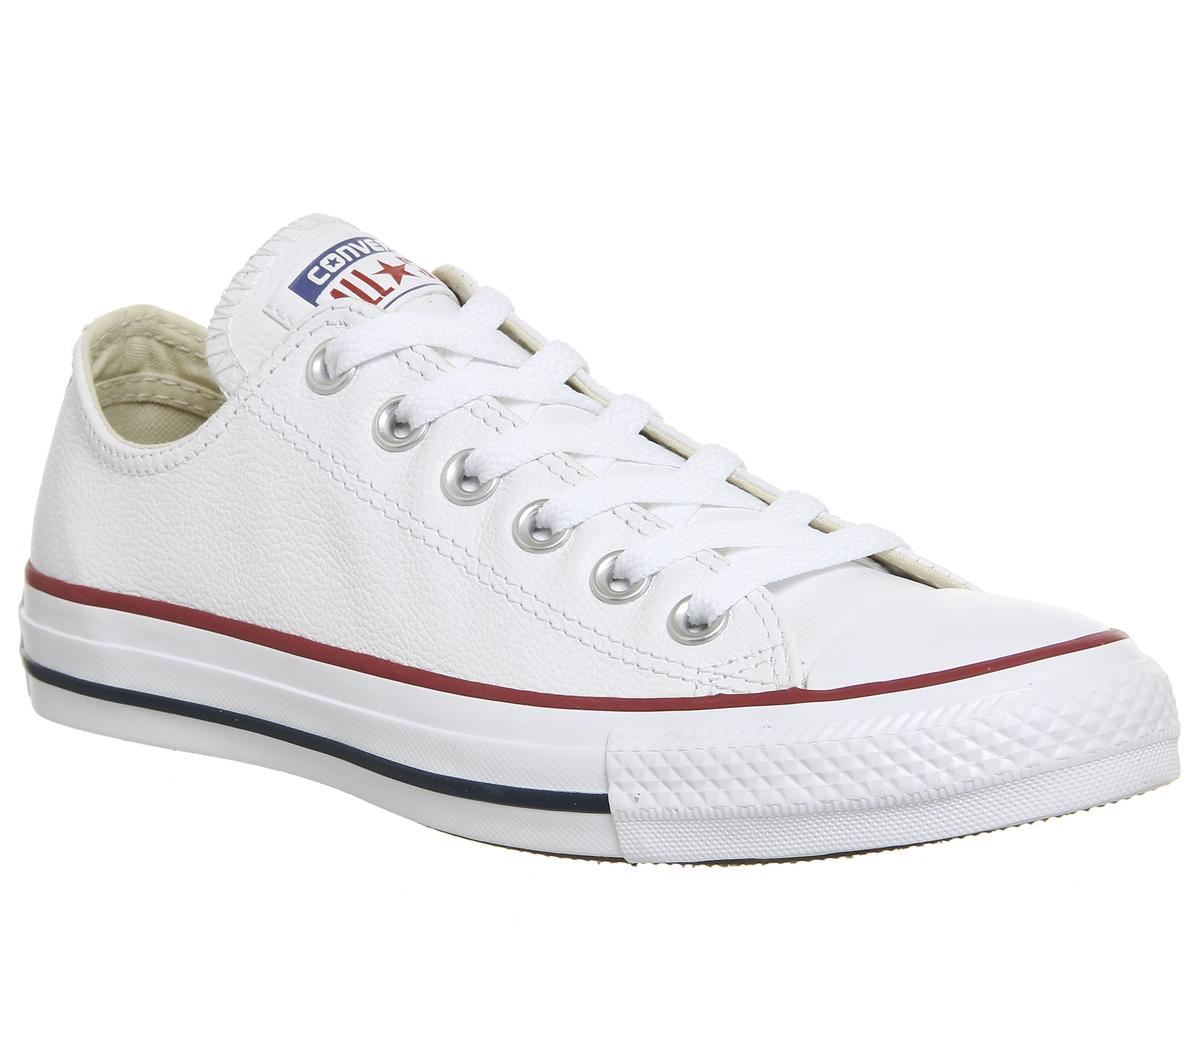 Converse All Star Low Leather Optical White - Unisex Sports